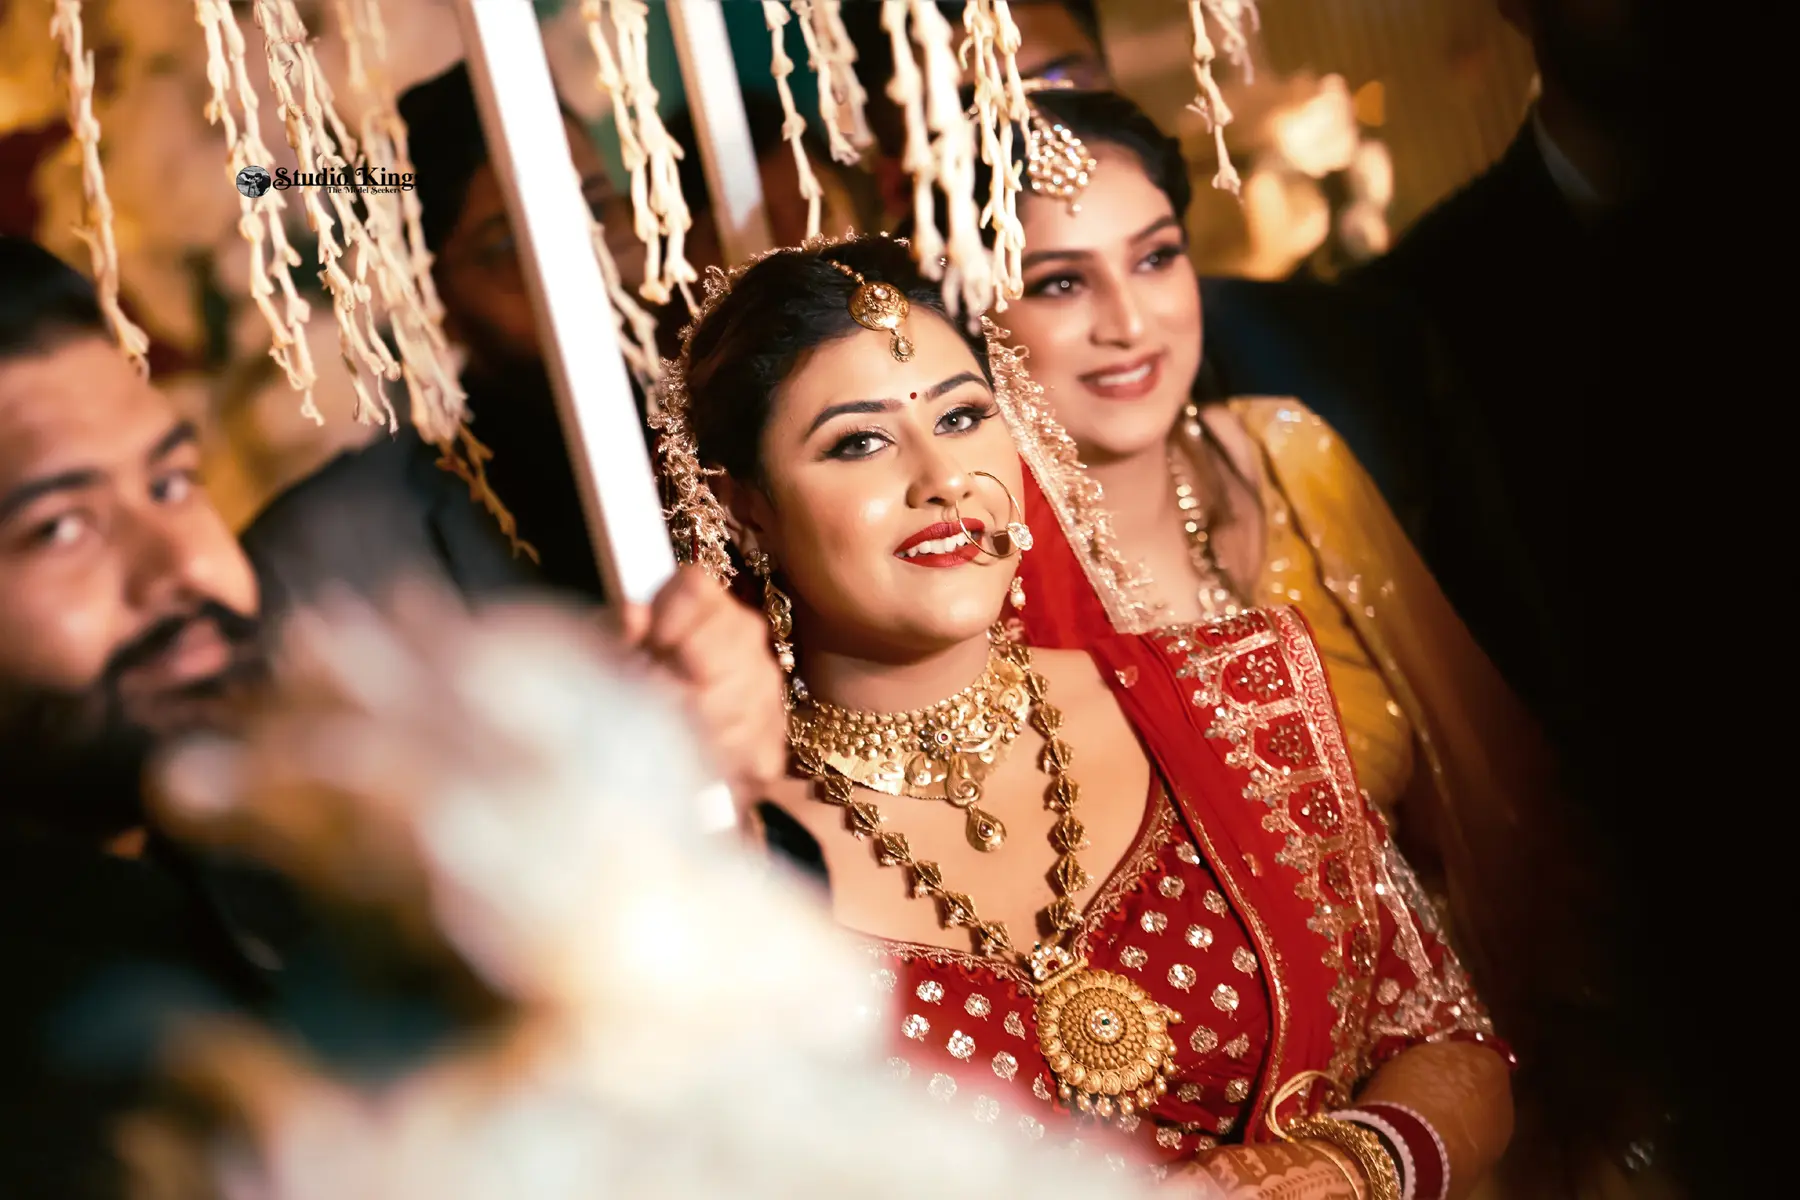 Witness the graceful entrance of the bride as she steps into her new journey. Studio Kings Best Wedding Photographer in Chandigarh captures the elegance and anticipation that surrounds this special moment.